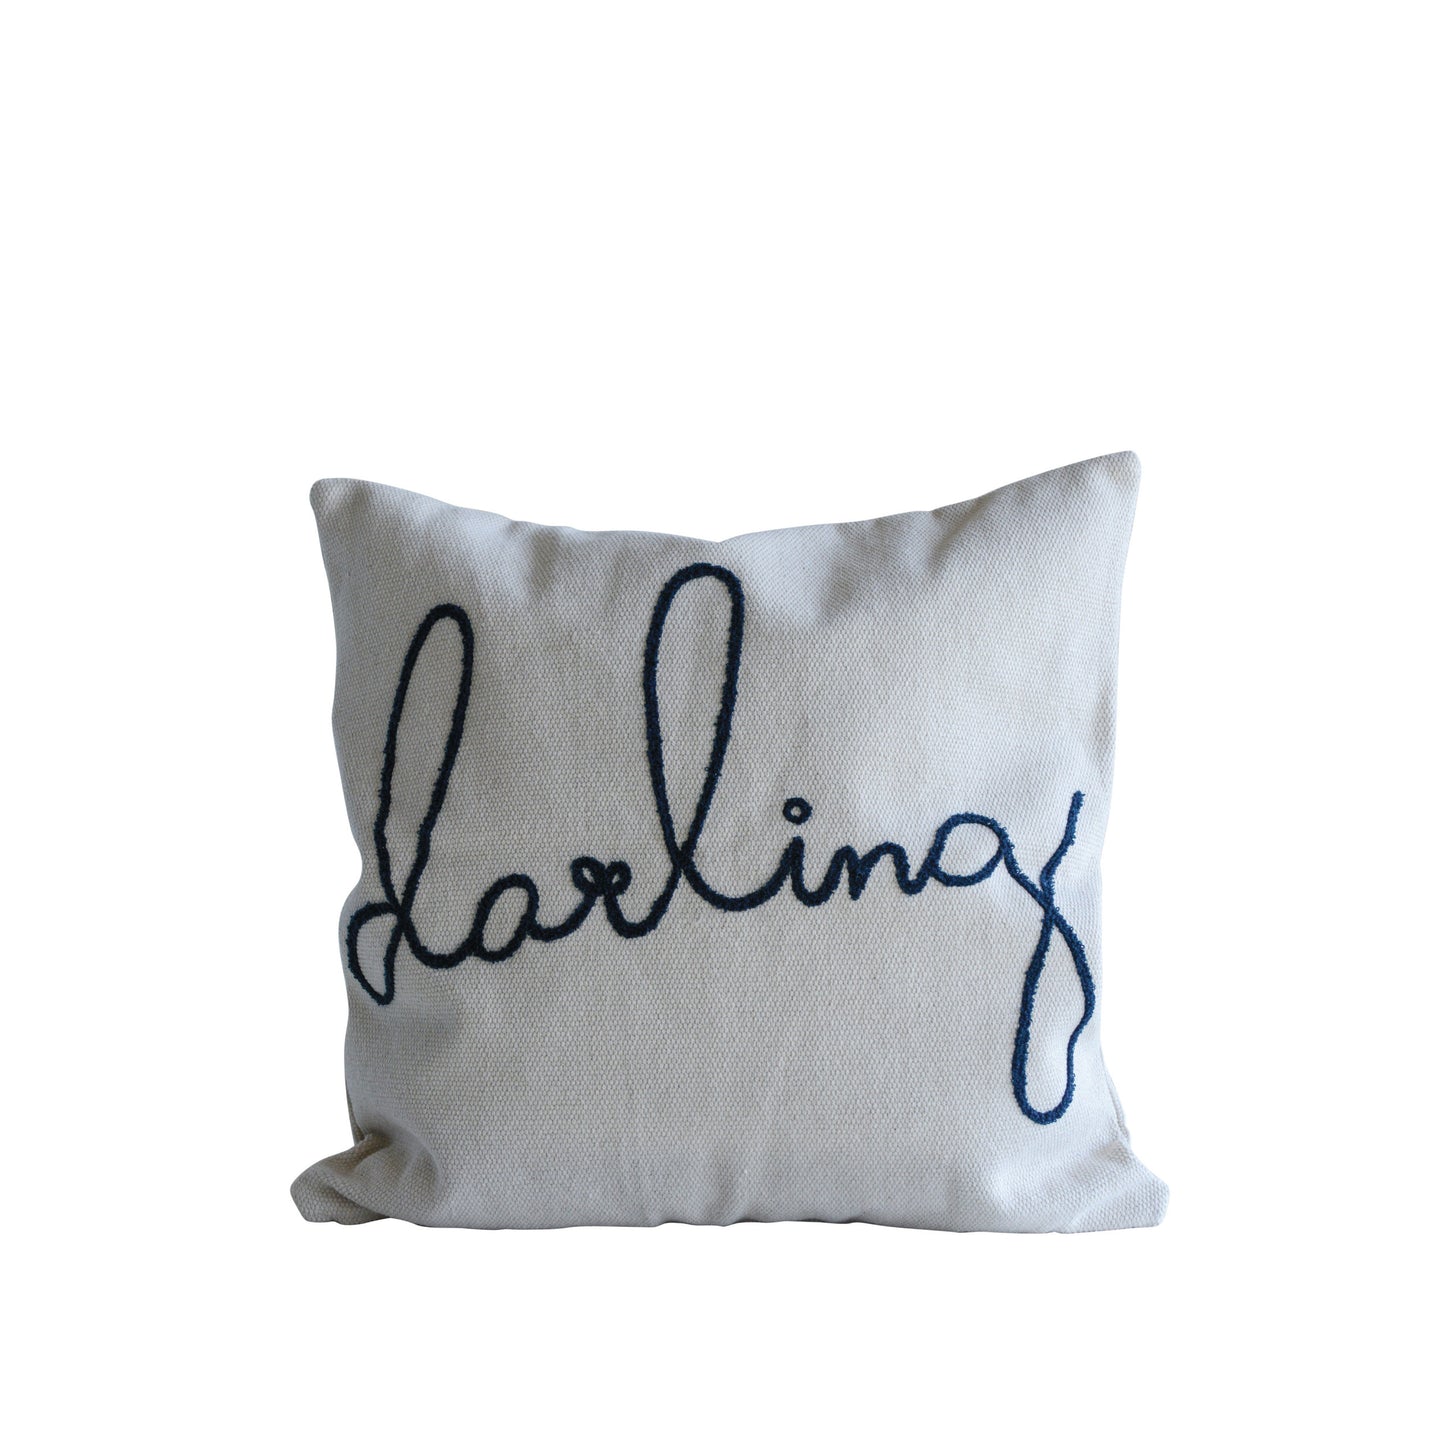 Darling Cotton Pillow with Embroidered